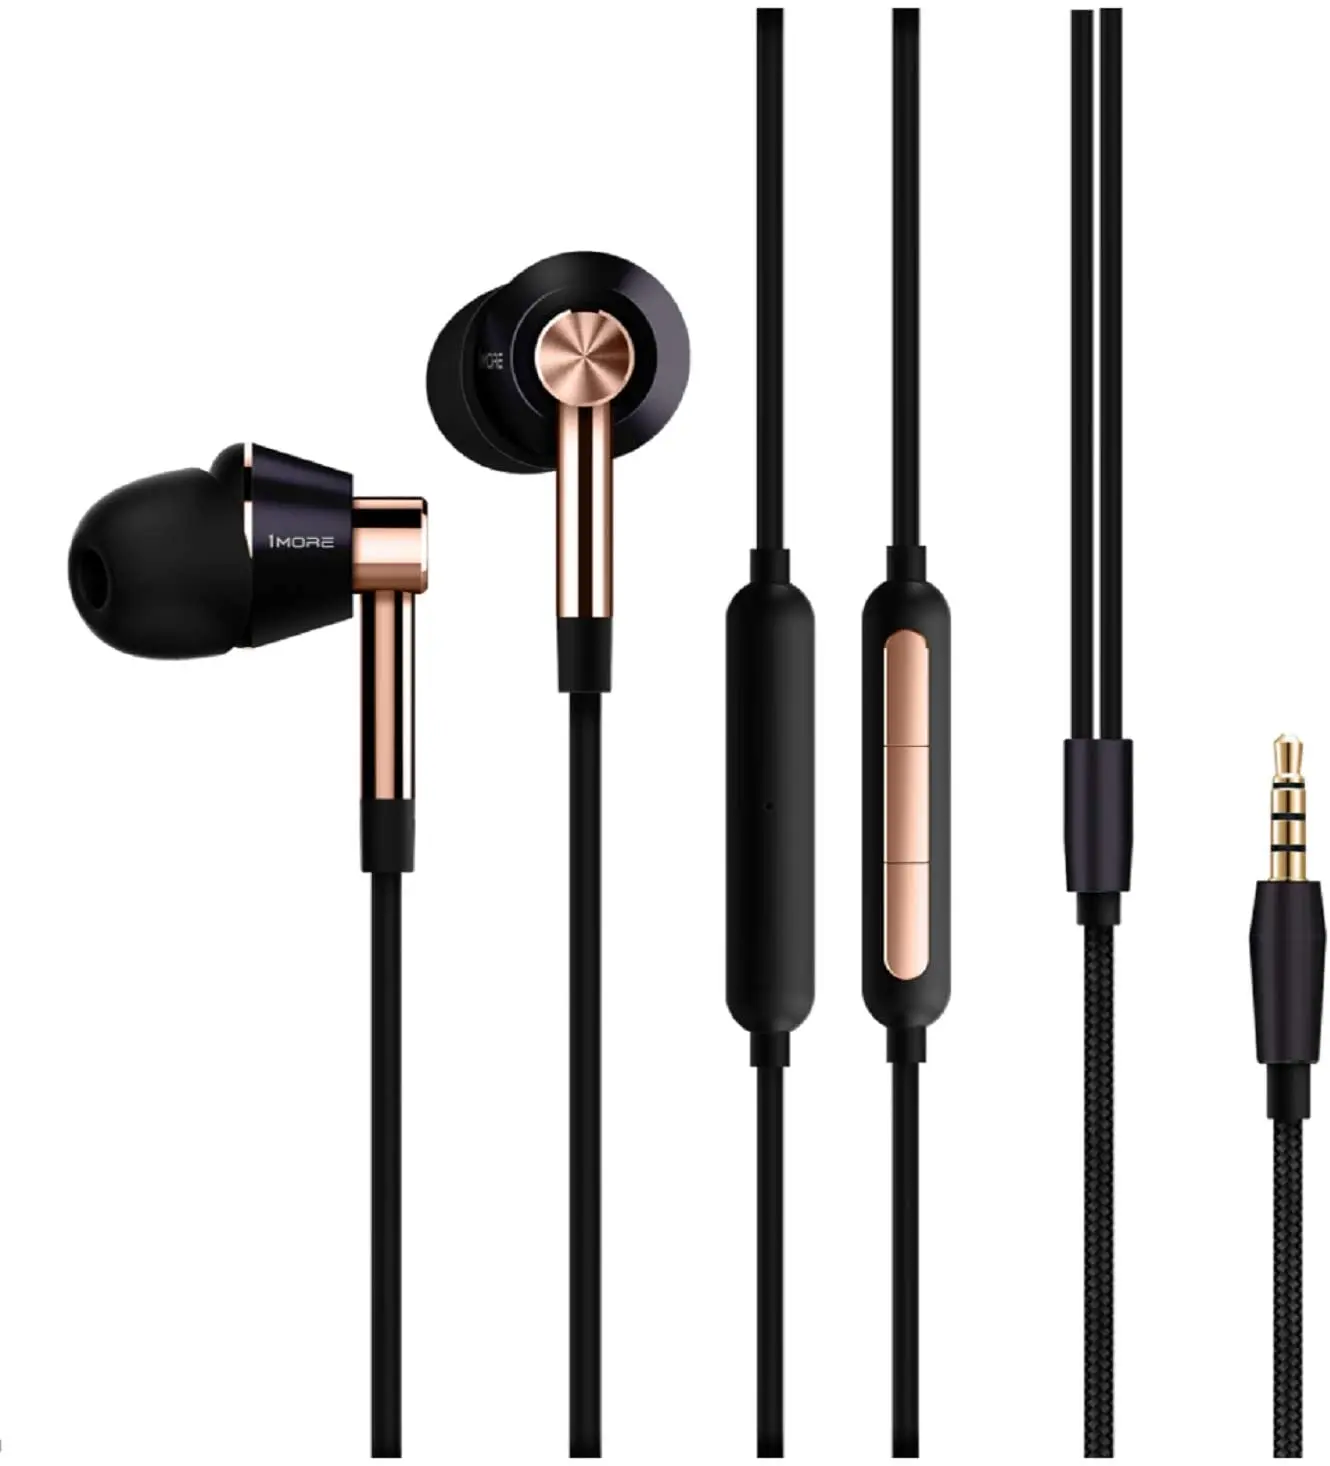 

1MORE E1001 Triple Driver In-Ear Earphones Headphones with High Resolution,Bass Driven Sound,Hi-Res for Smartphones/PC/Tablet